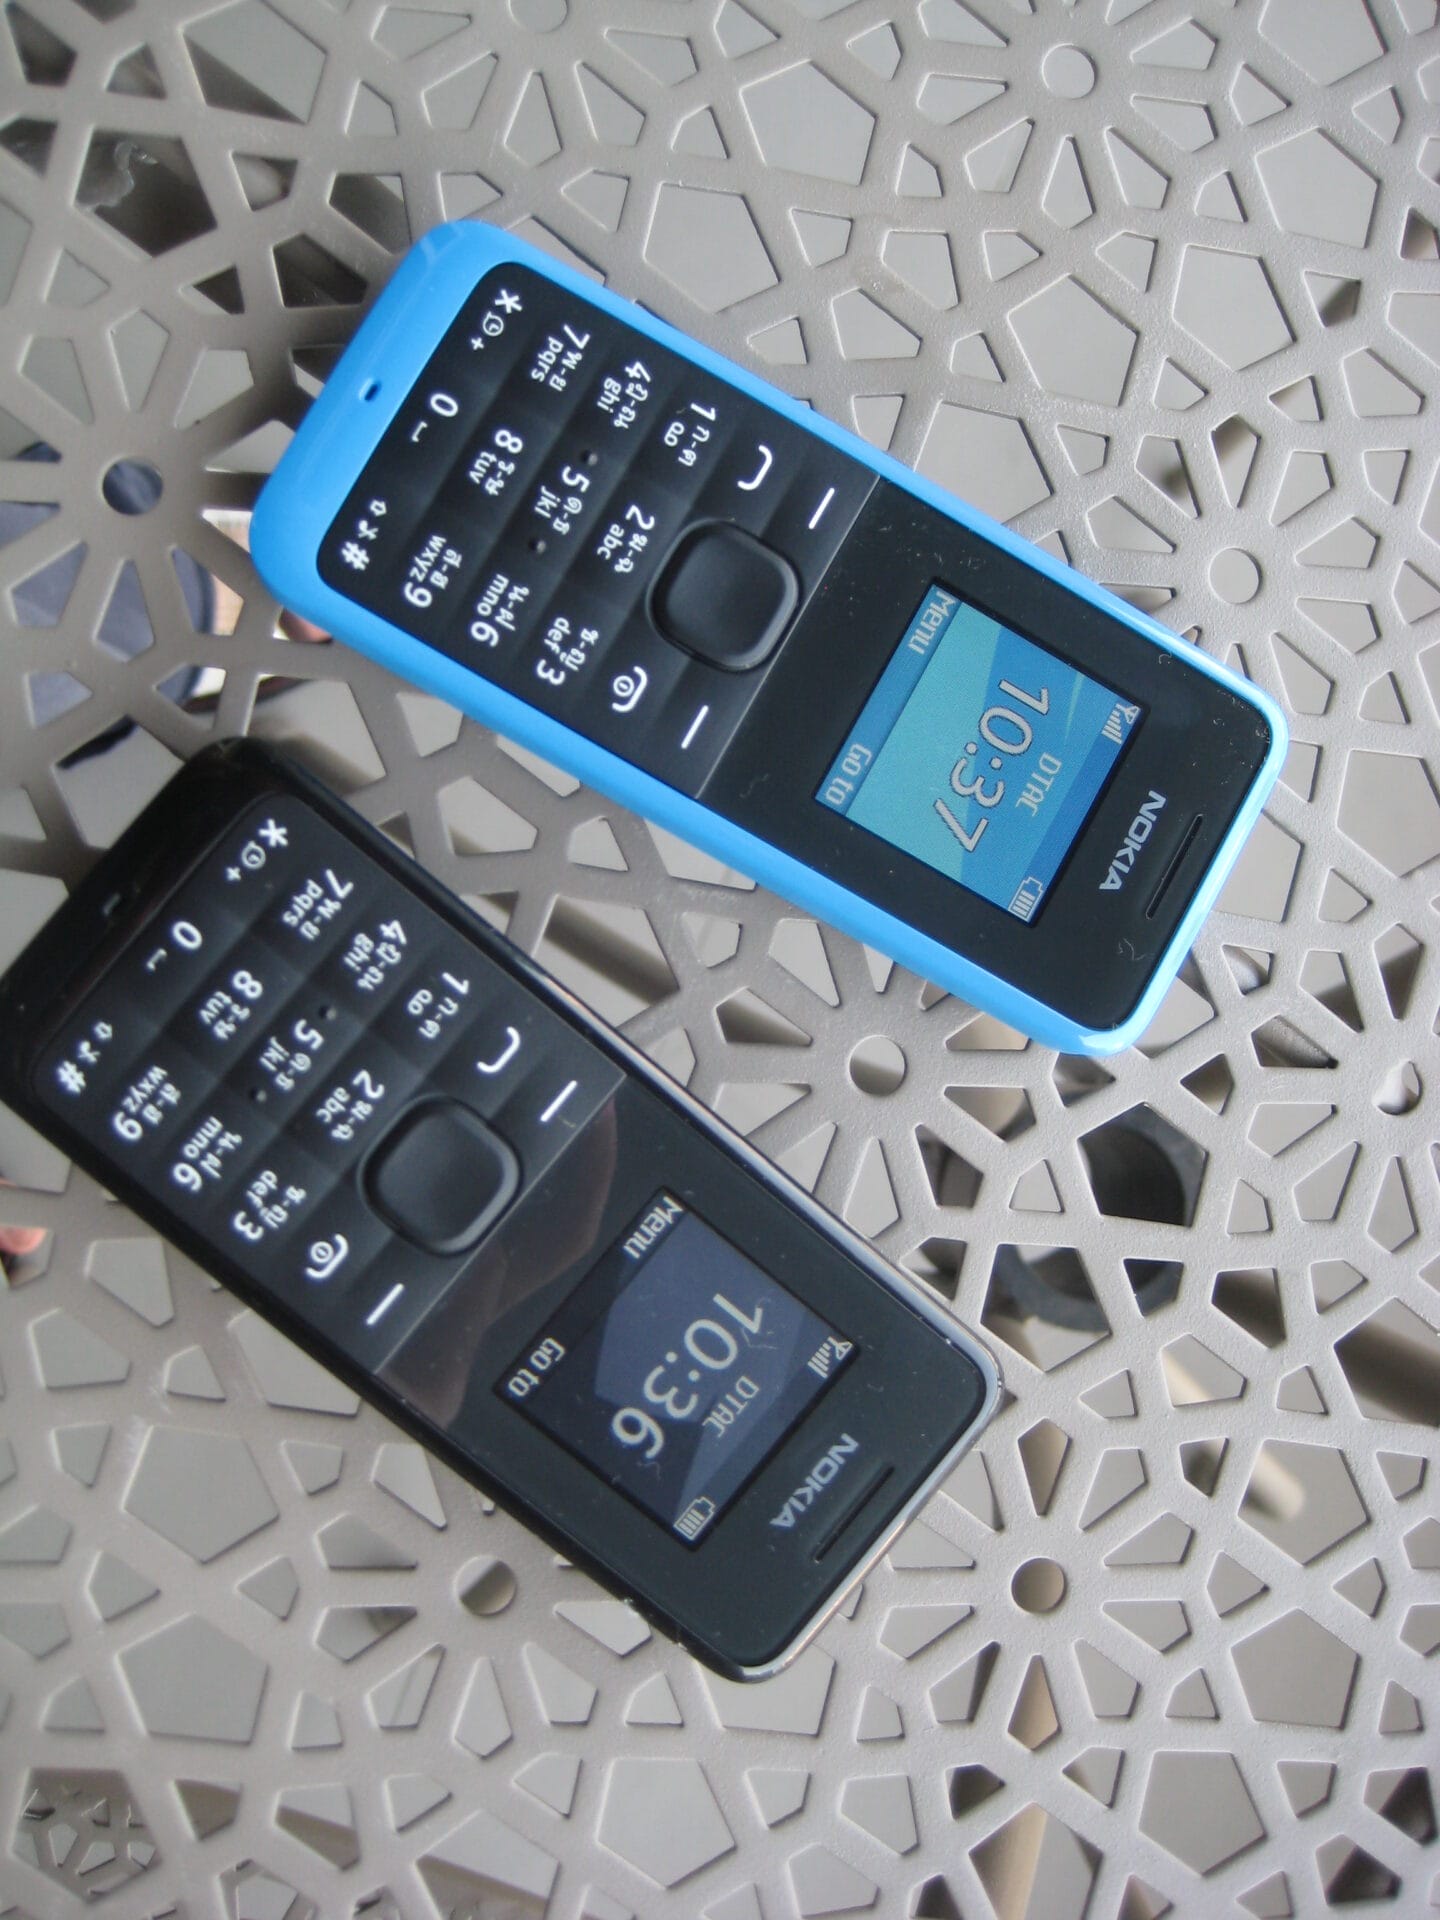 Our Phones in Chiang Mai